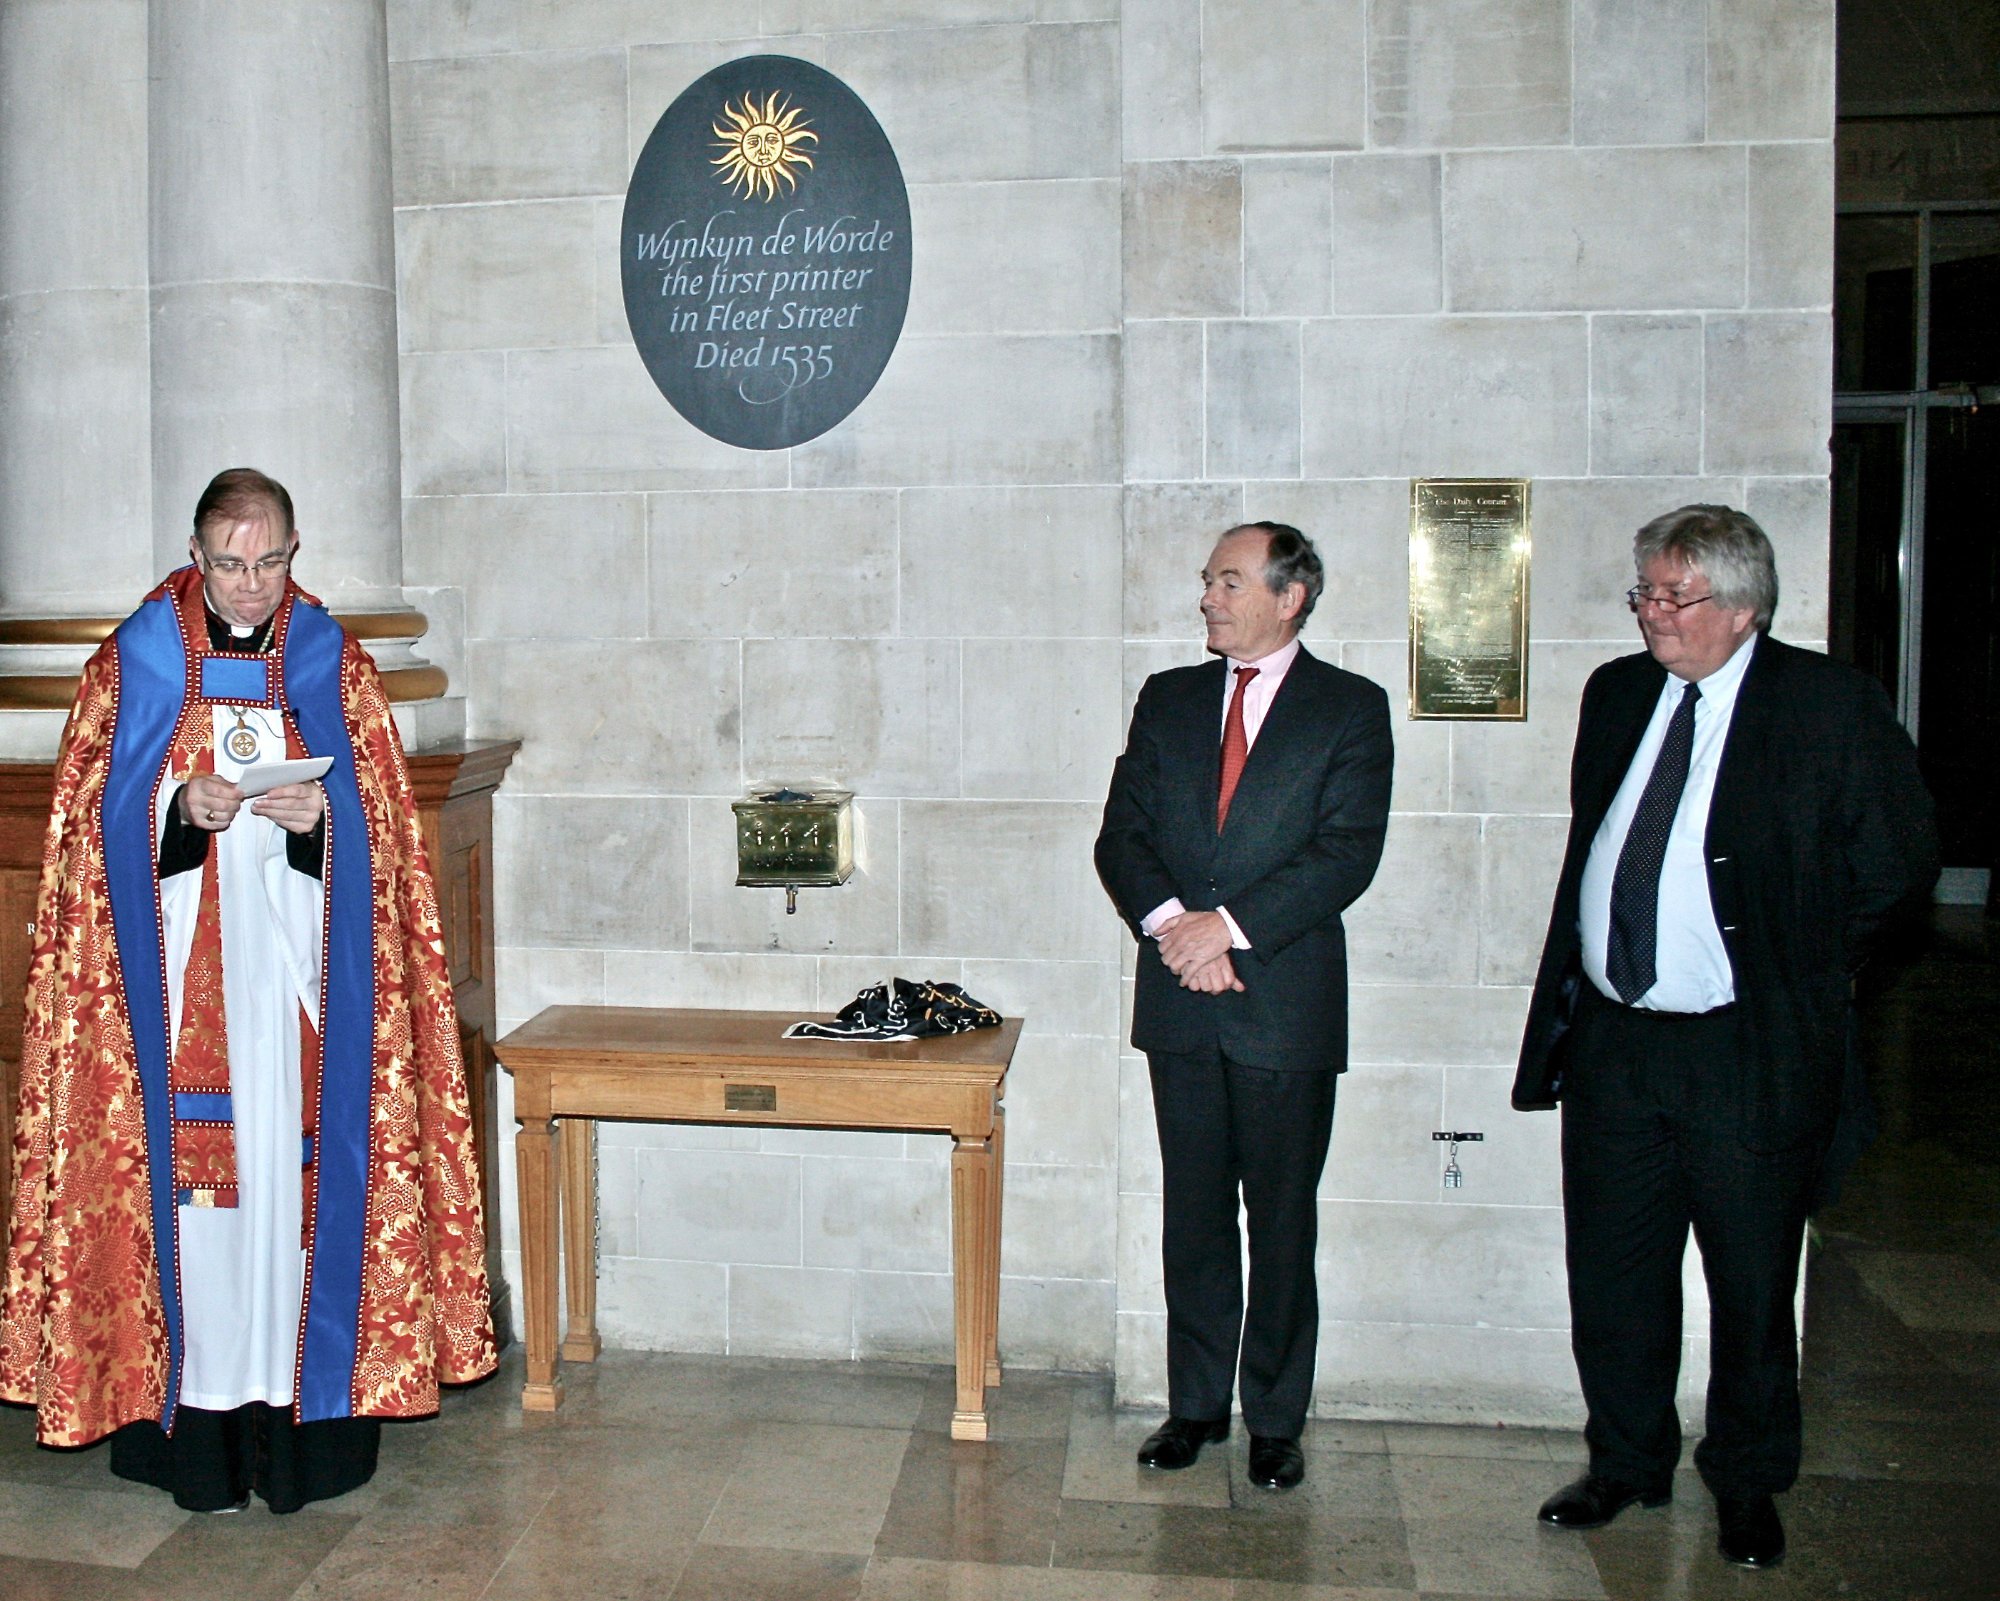 Unveiling the Wynkyn de Worde plaque at St Bride’s Church